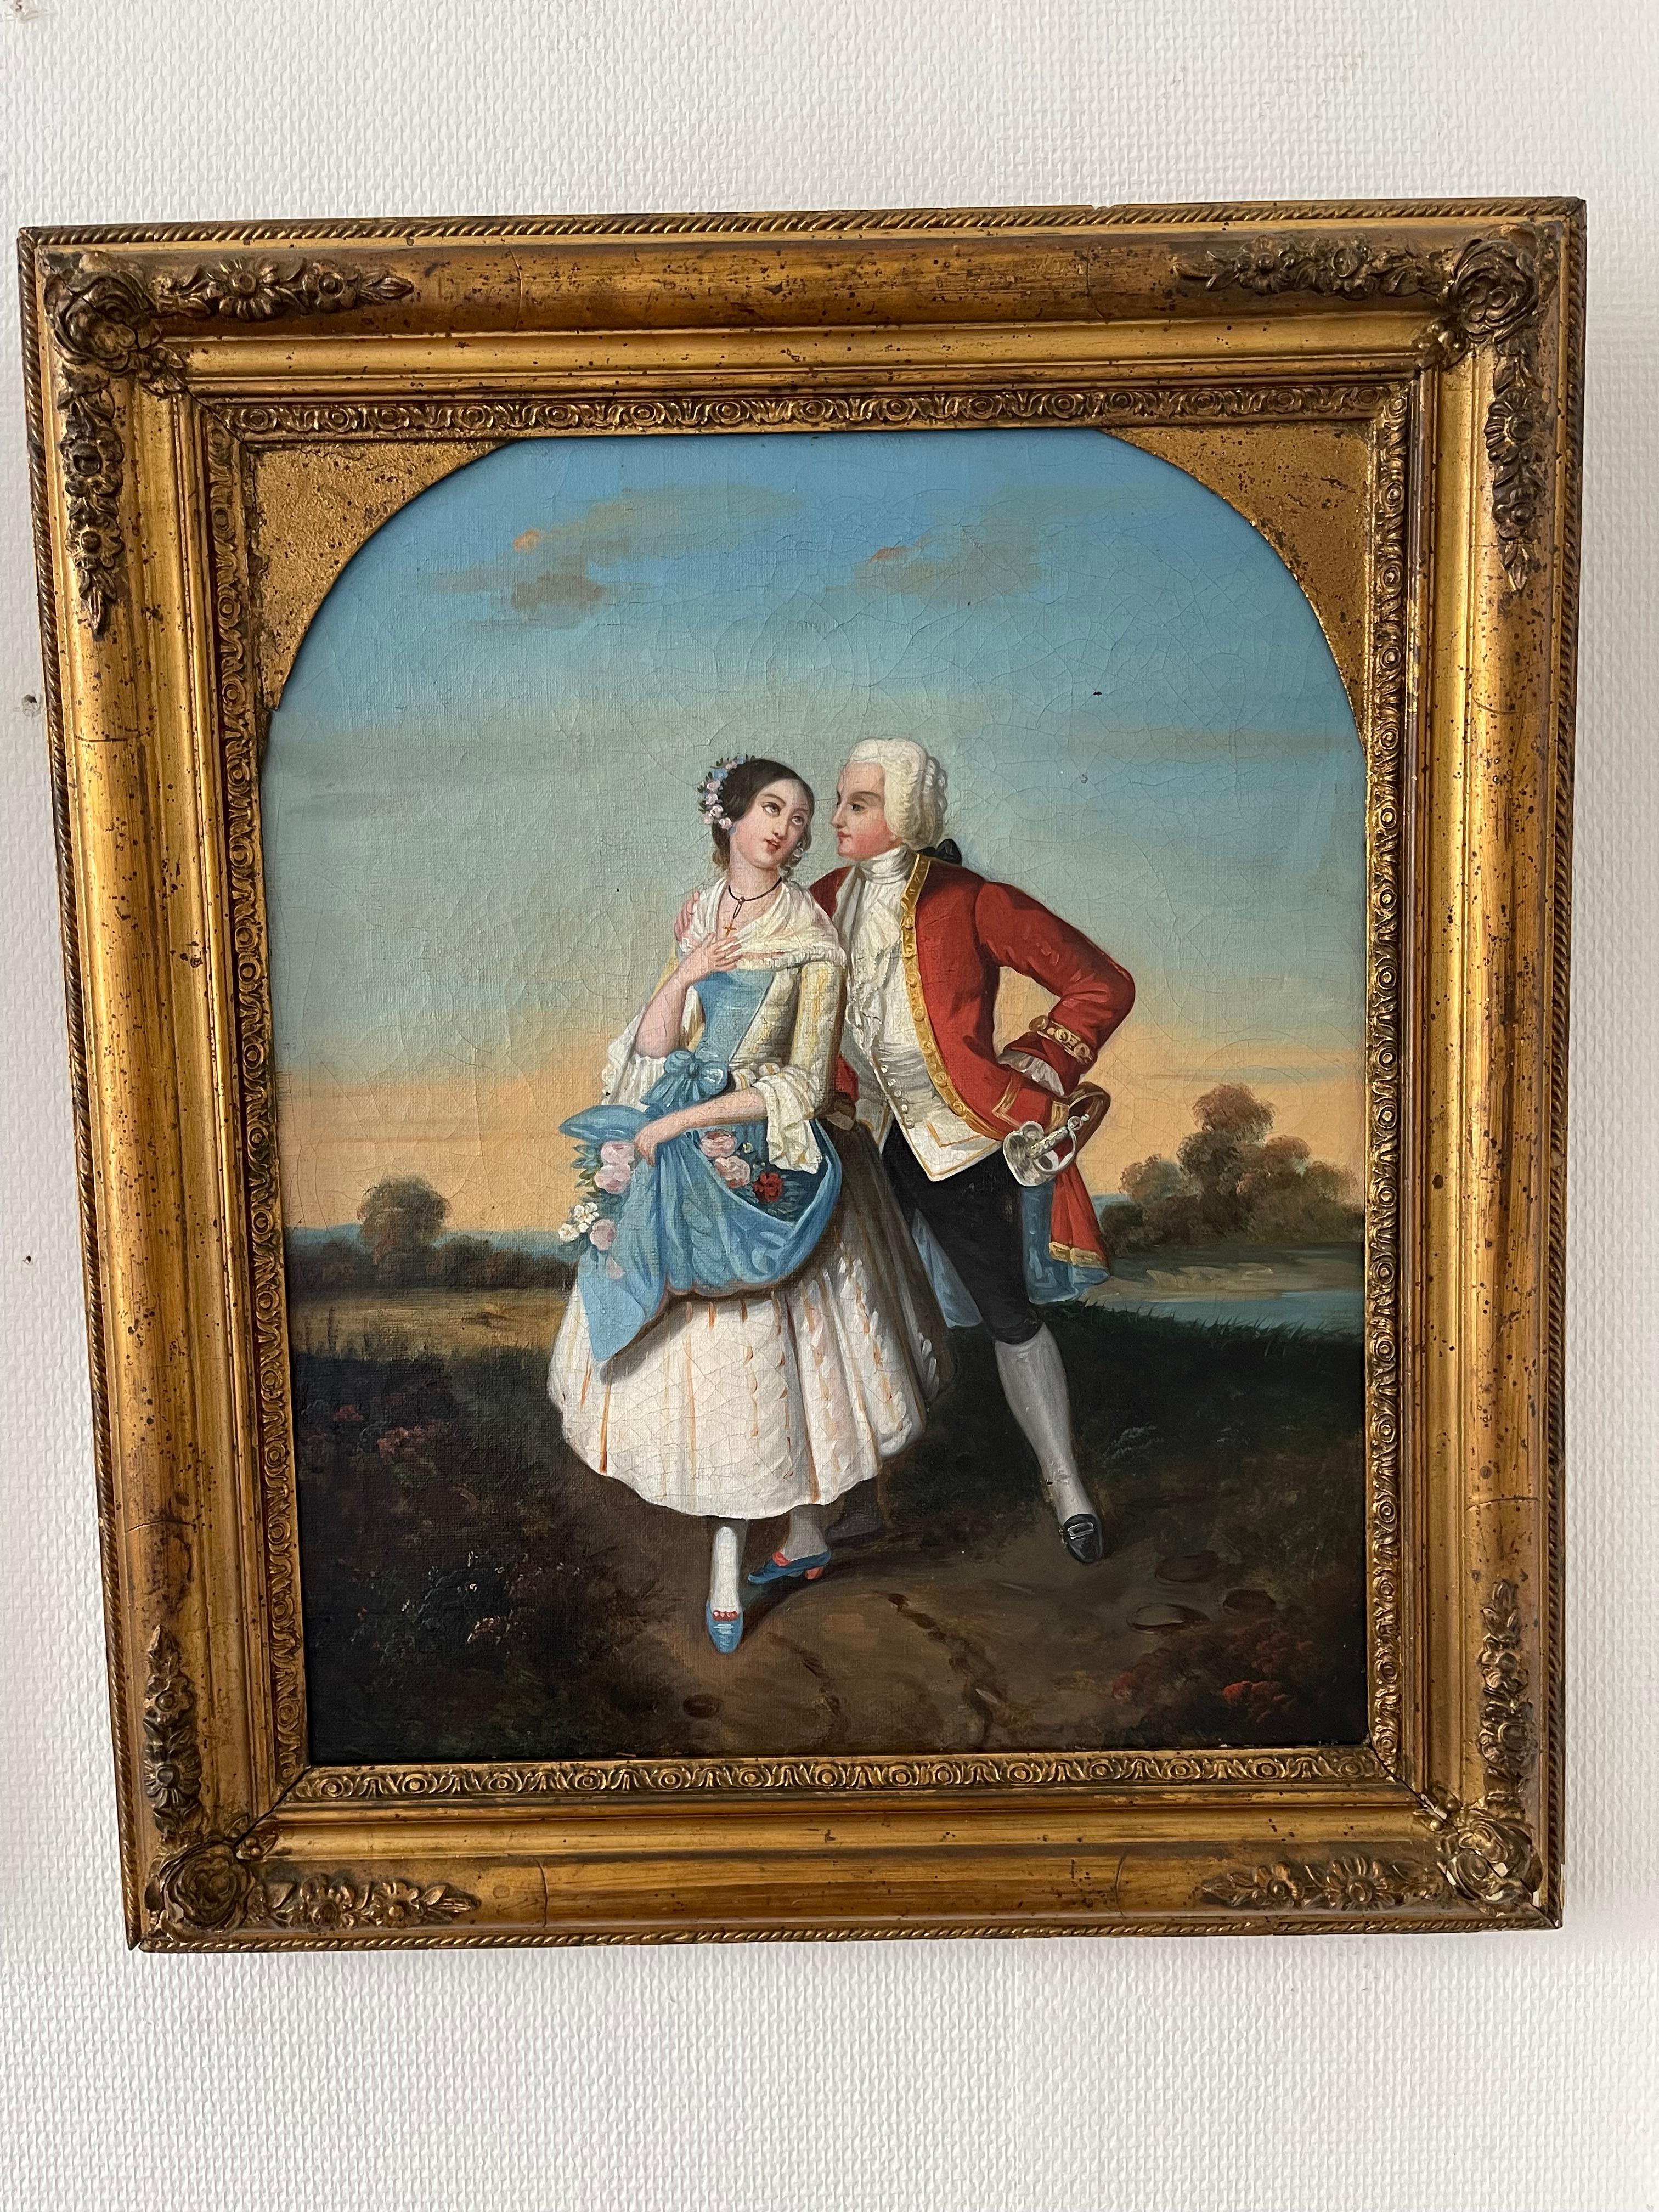 These two paintings form a pair of artistic works that capture typical amorous scenes from the 19th century. The first painting depicts two young individuals standing, dressed in period costumes. There is a palpable tension in the exchanged glances